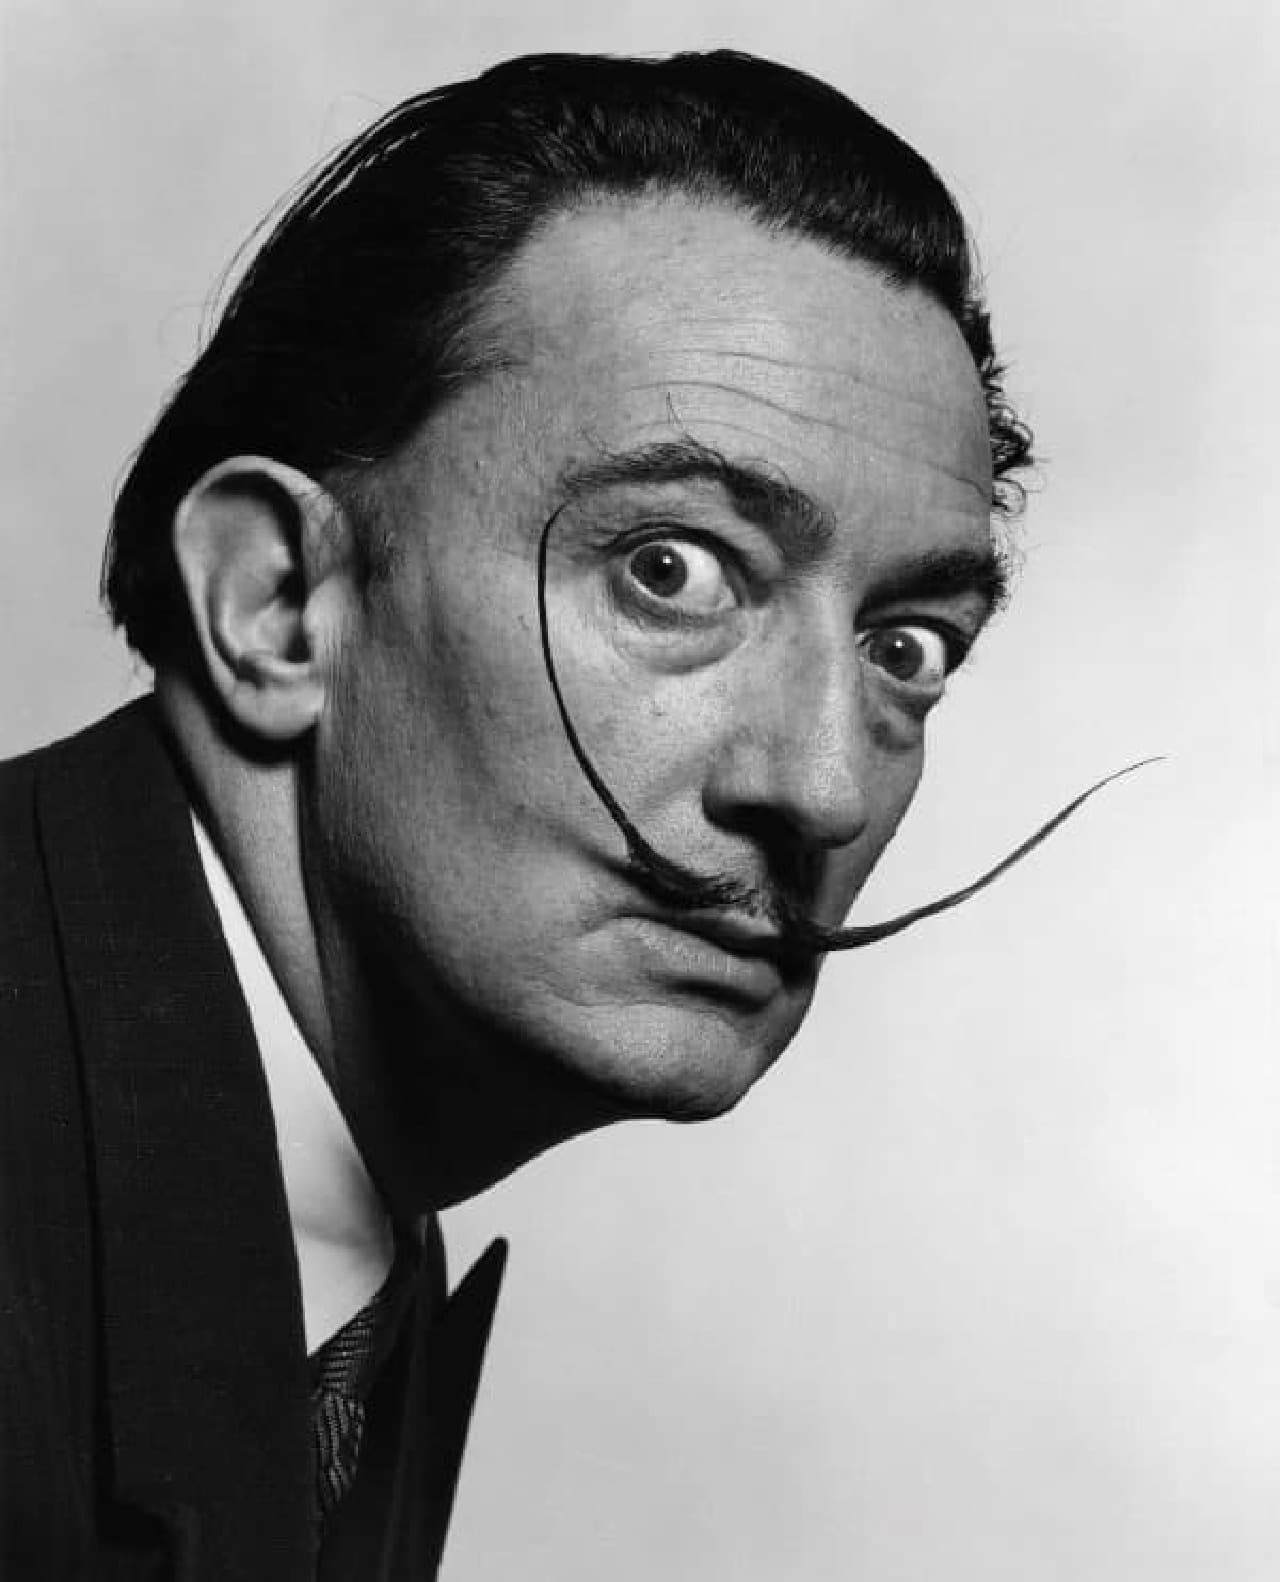 What kind of watch did Dali actually wear?